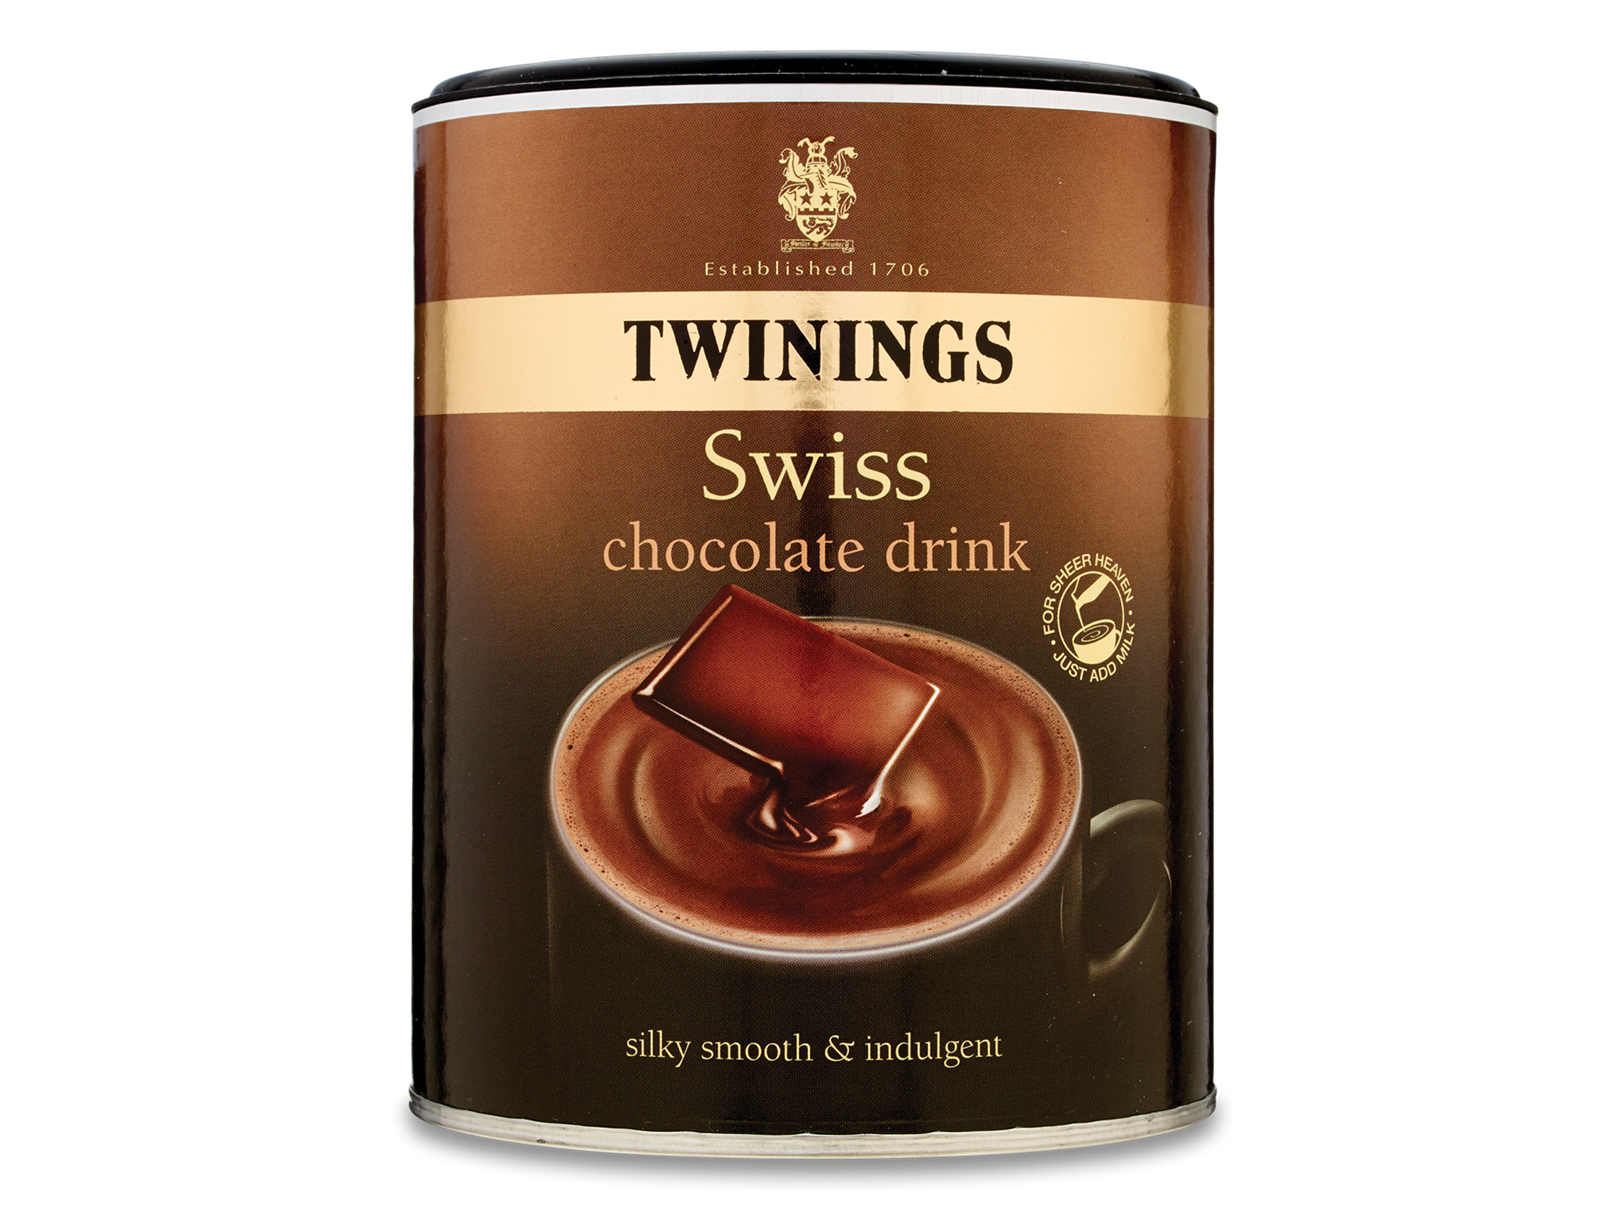 Treat yourself to a night in with a steaming mug of our hot chocolate. Silky-smooth and made with real Swiss milk chocolate, each sip is a dreamy taste of heaven.